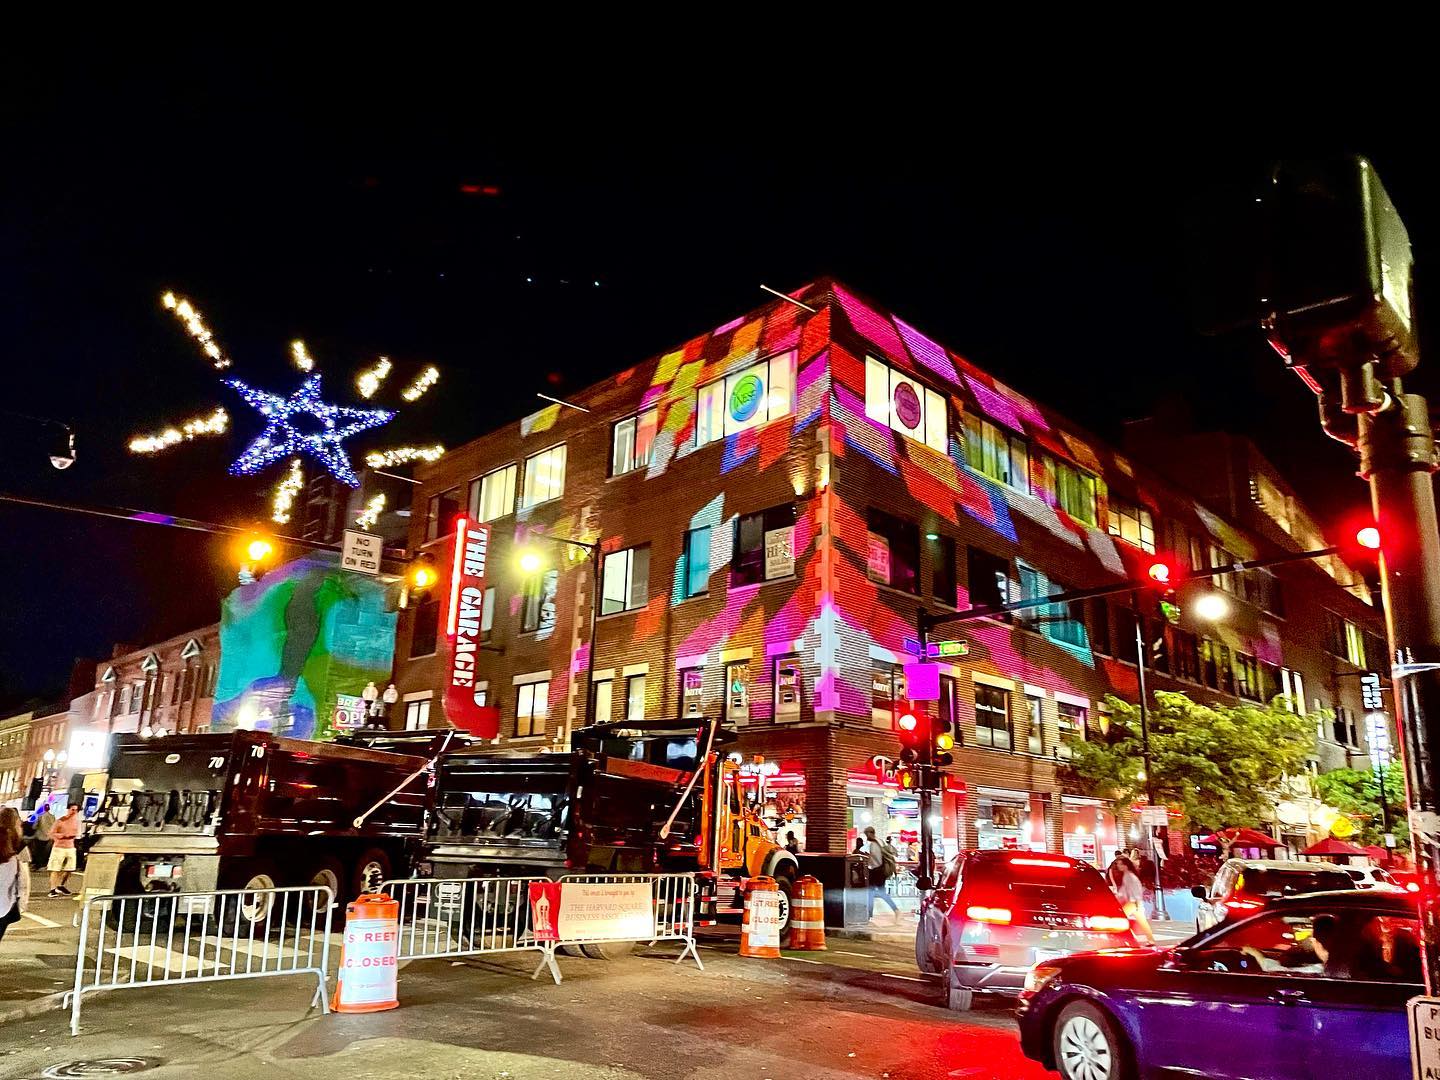 Caught some pretty cool stuff happening in Harvard Square last weekend… and on the side of the Garage no less! Illuminations and installations by @illuminus 